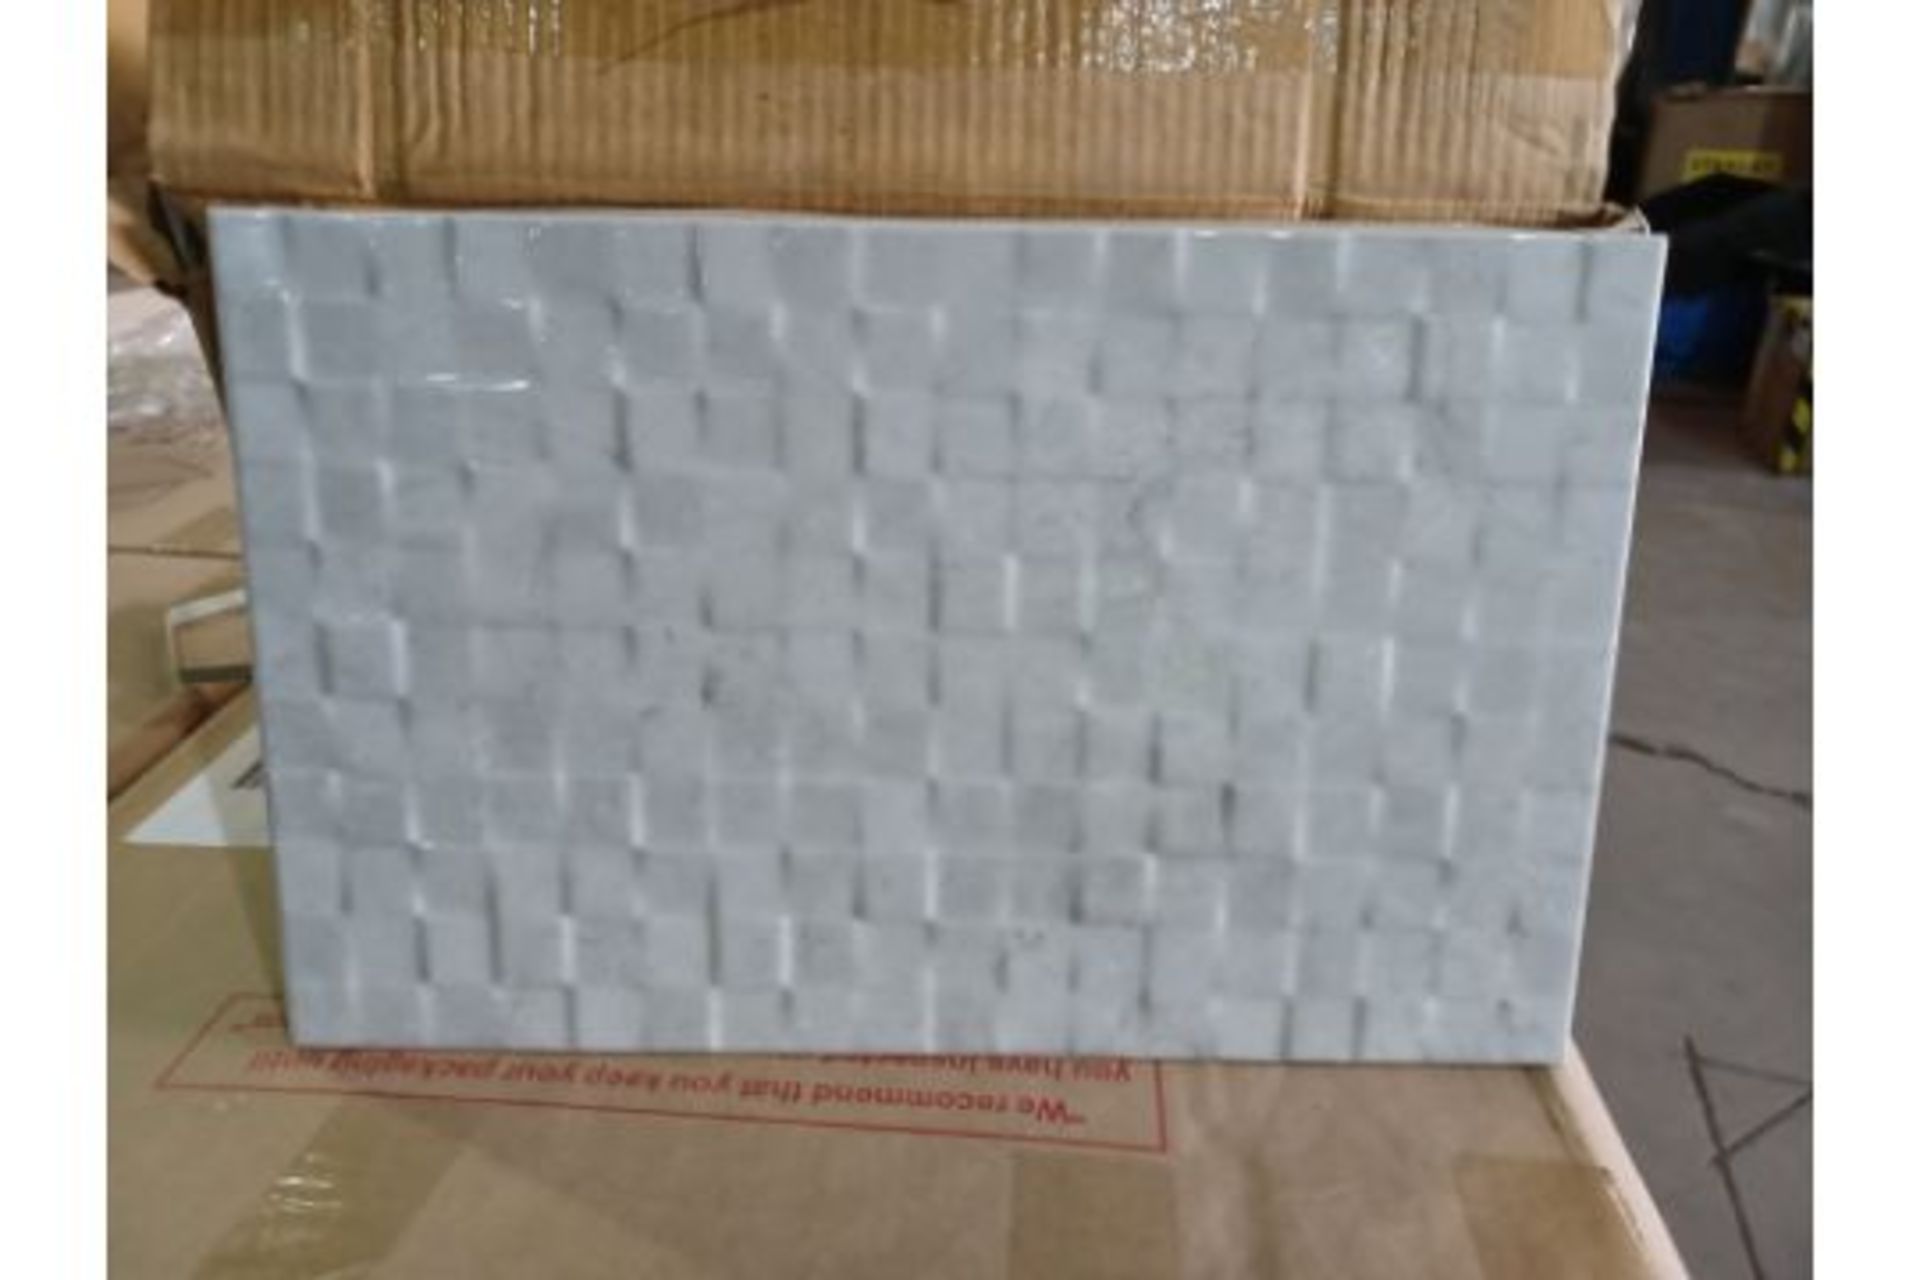 12 x PACKS OF IDEAL MARBLE DÉCOR GLAZED CERAMIC WALL TILES. SIZE: 400mm(L) x 250mm (H). 7.5mm THICK.